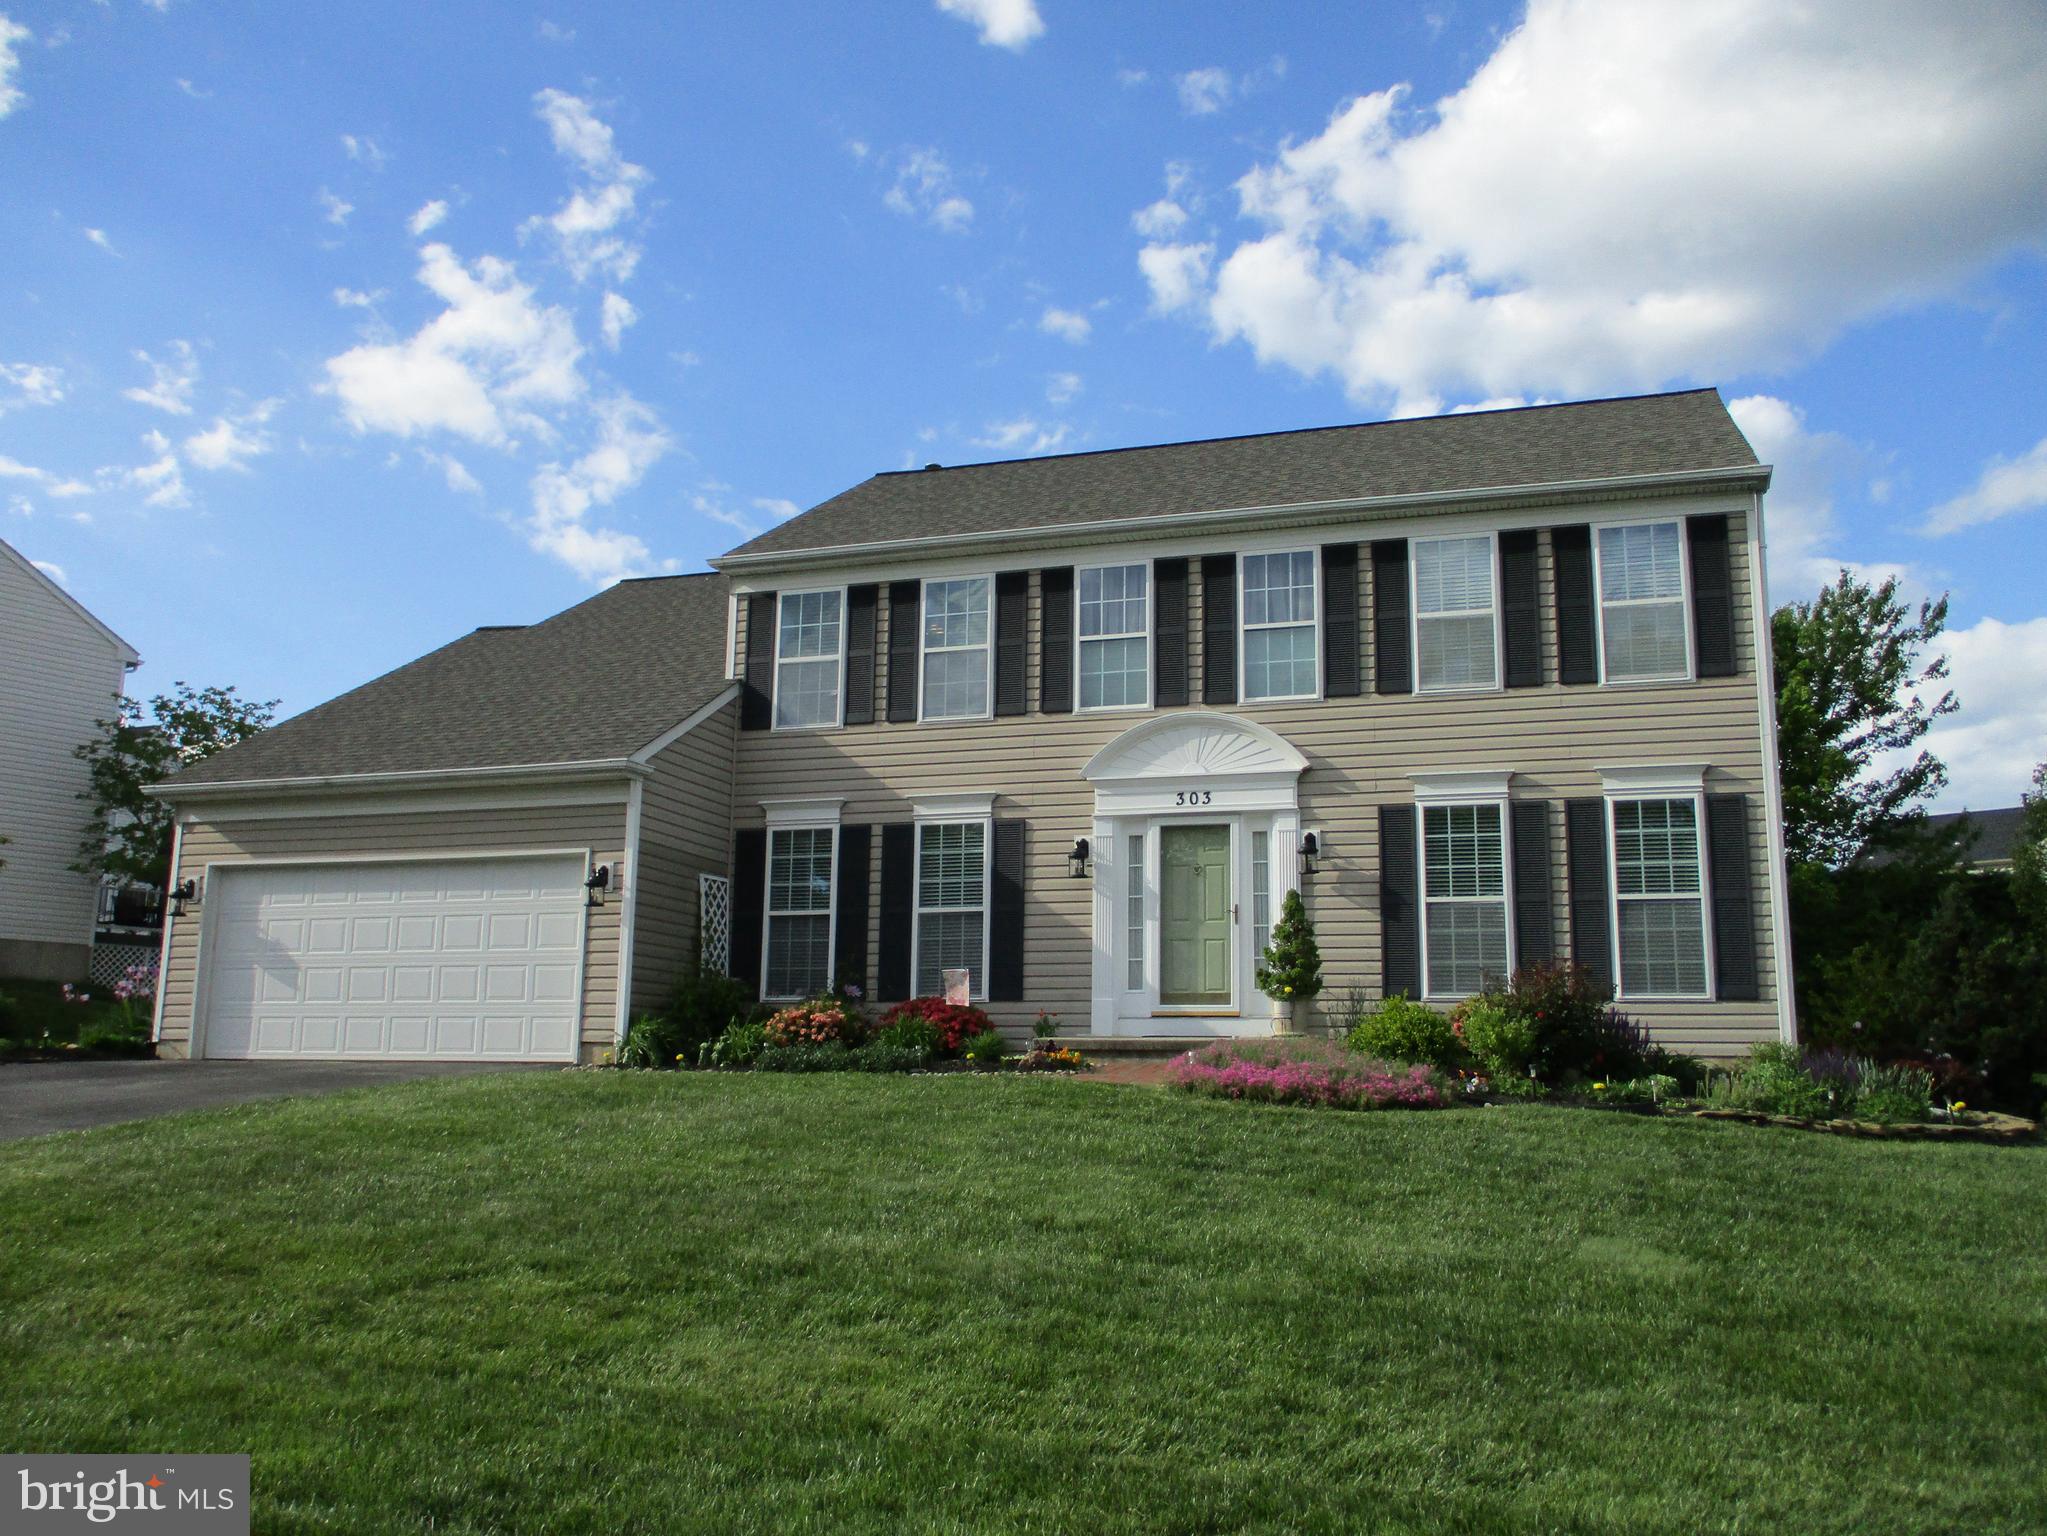 303 Mourning Dove Drive  Home Listings - John and Mary Luca Hockessin, Greenville, Newark, Middletown, Bear, North Wilmington, Wilmington, Brandywine Hundred, Pike Creek, Smyrna, Townsend, Dover, Rehoboth, Bethany, Lewes, Milford, Malvern, Avondale, Landenberg